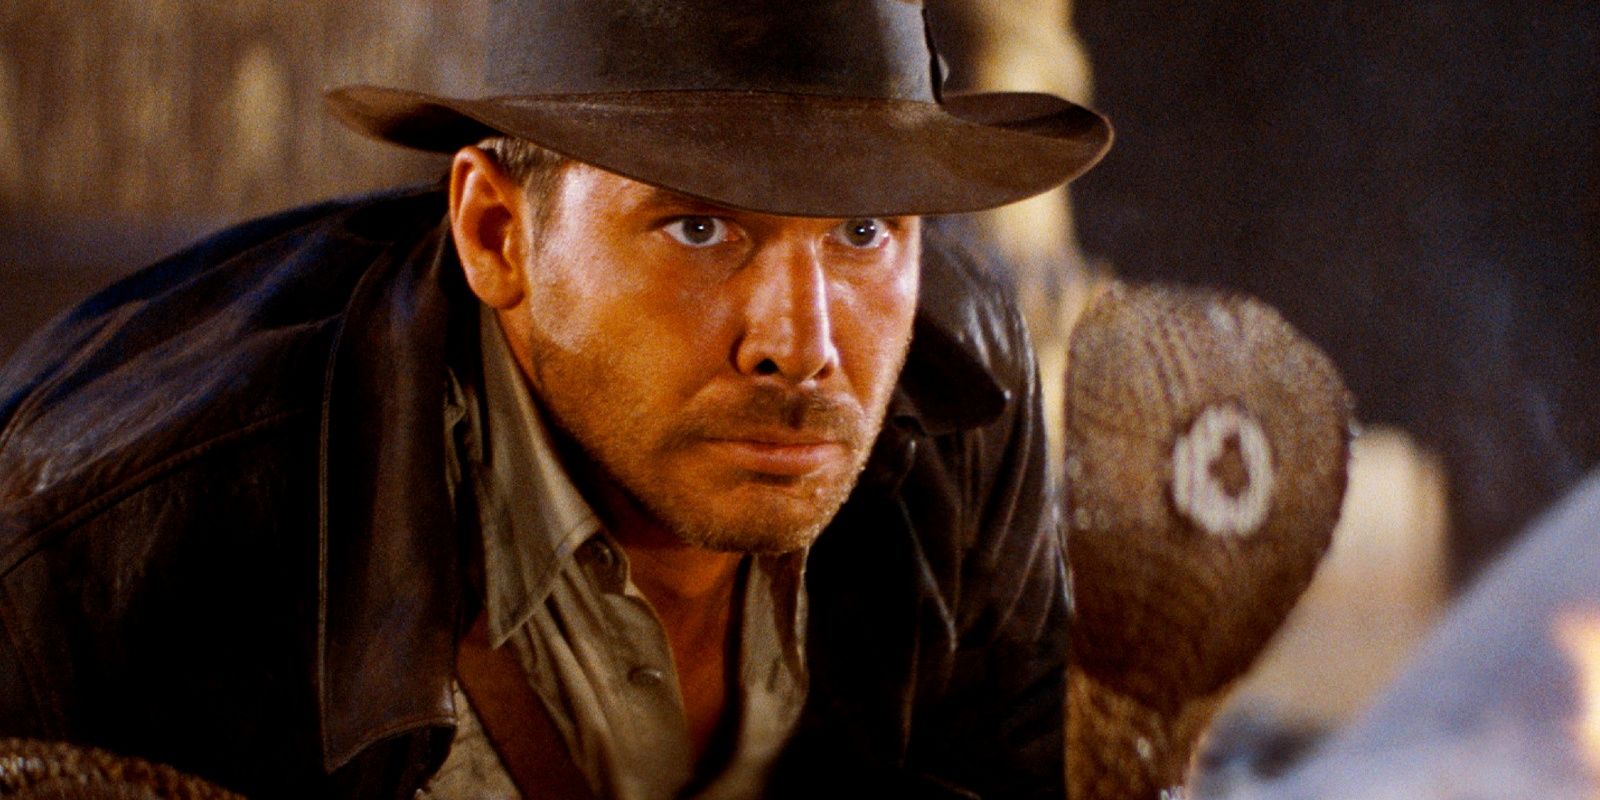 Harrison Ford as Indiana Jones terrified as he looks at a cobra in Raiders of the Lost Ark